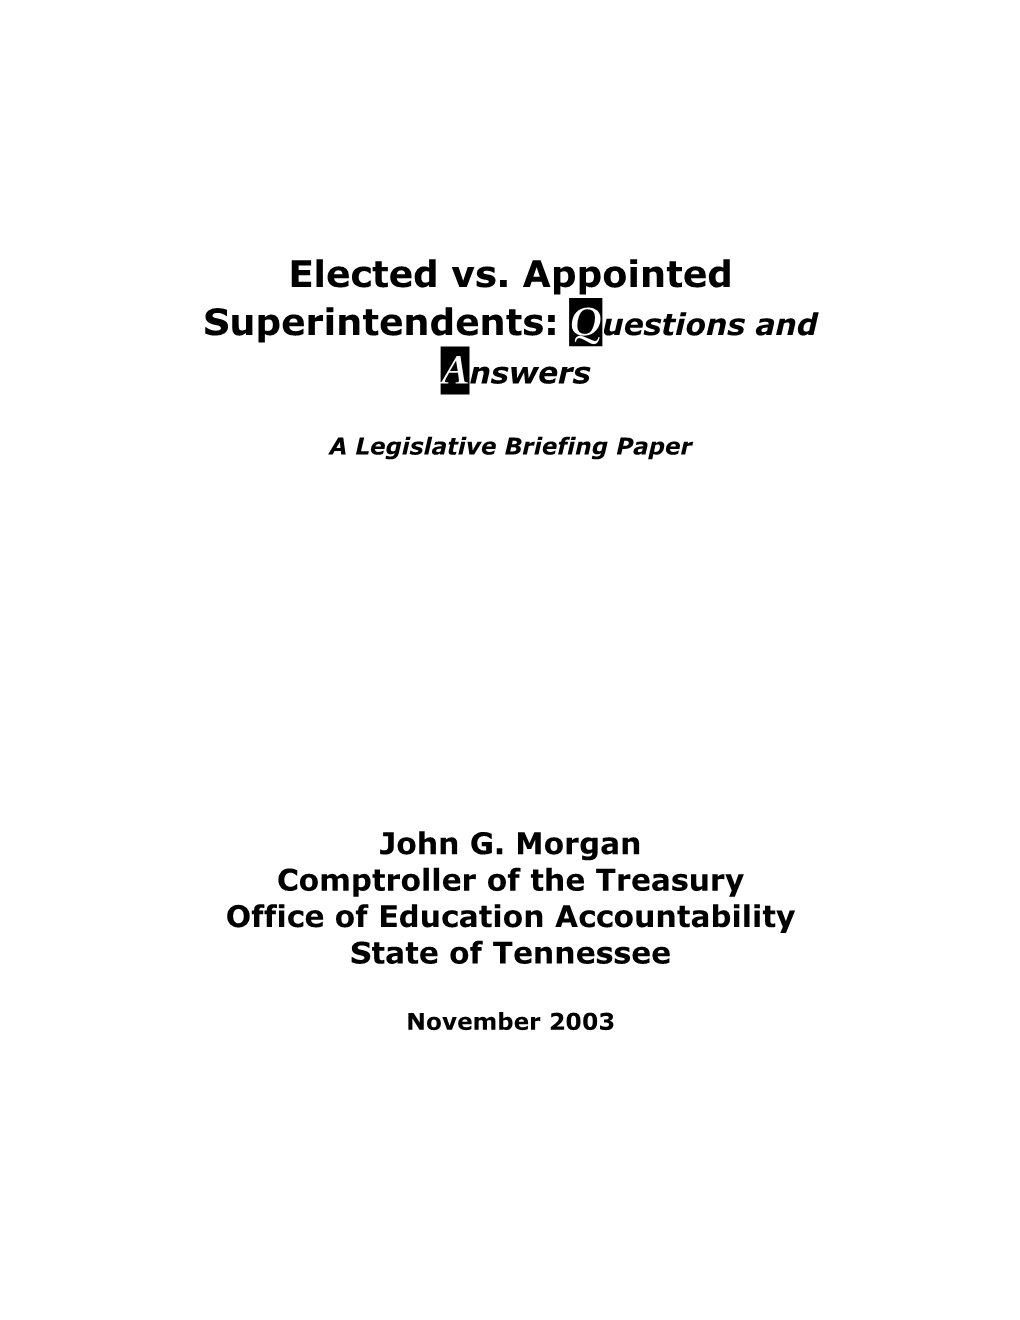 Elected Vs. Appointed Superintendents: Questions and Answers